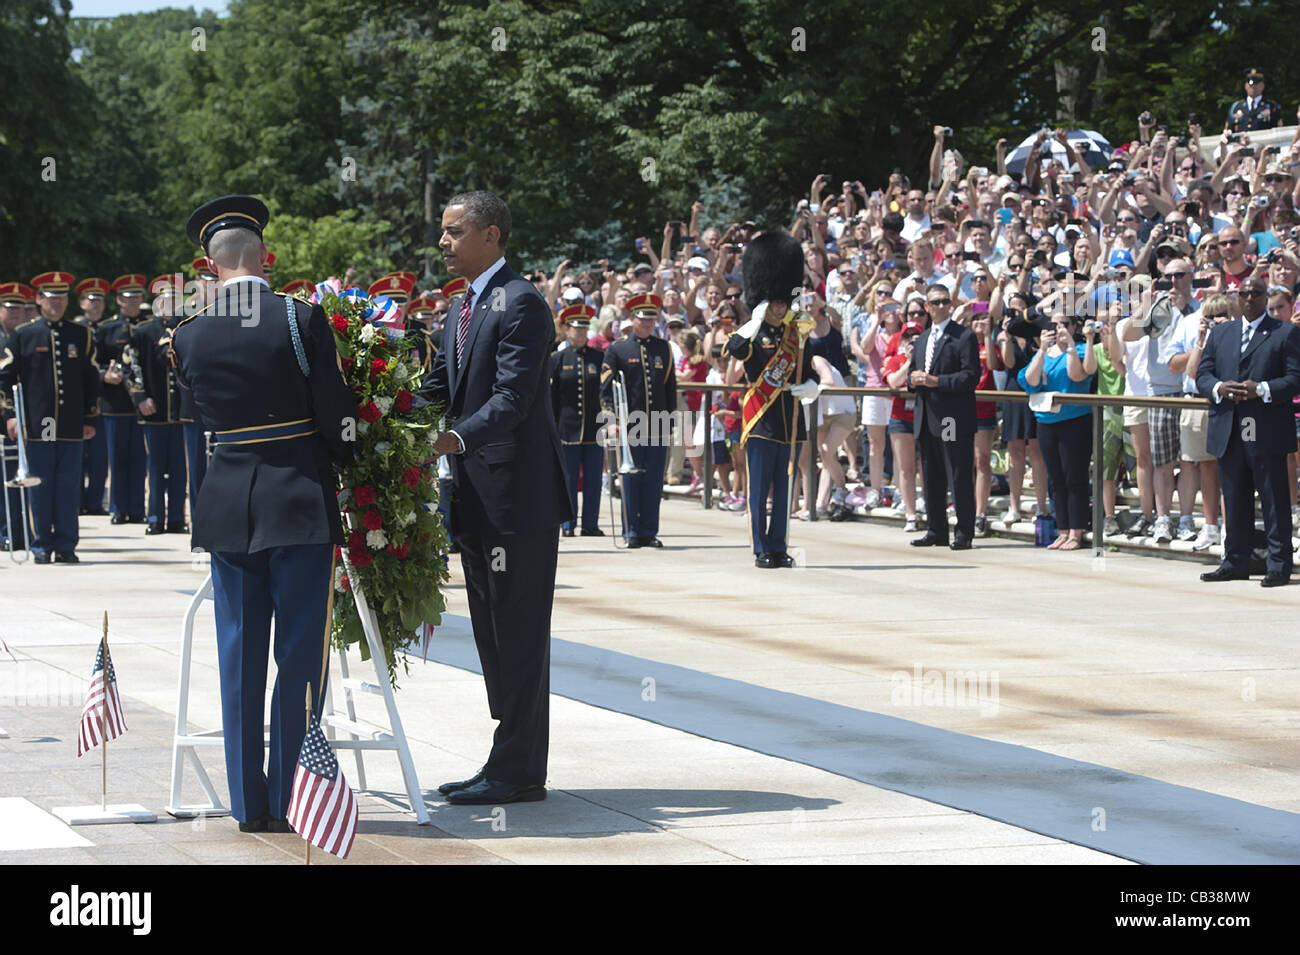 US President Barack Obama places a wreath at the Tomb of the Unknowns in honor of Memorial Day at Arlington National Cemetery May 28, 2012 in Arlington, VA Stock Photo